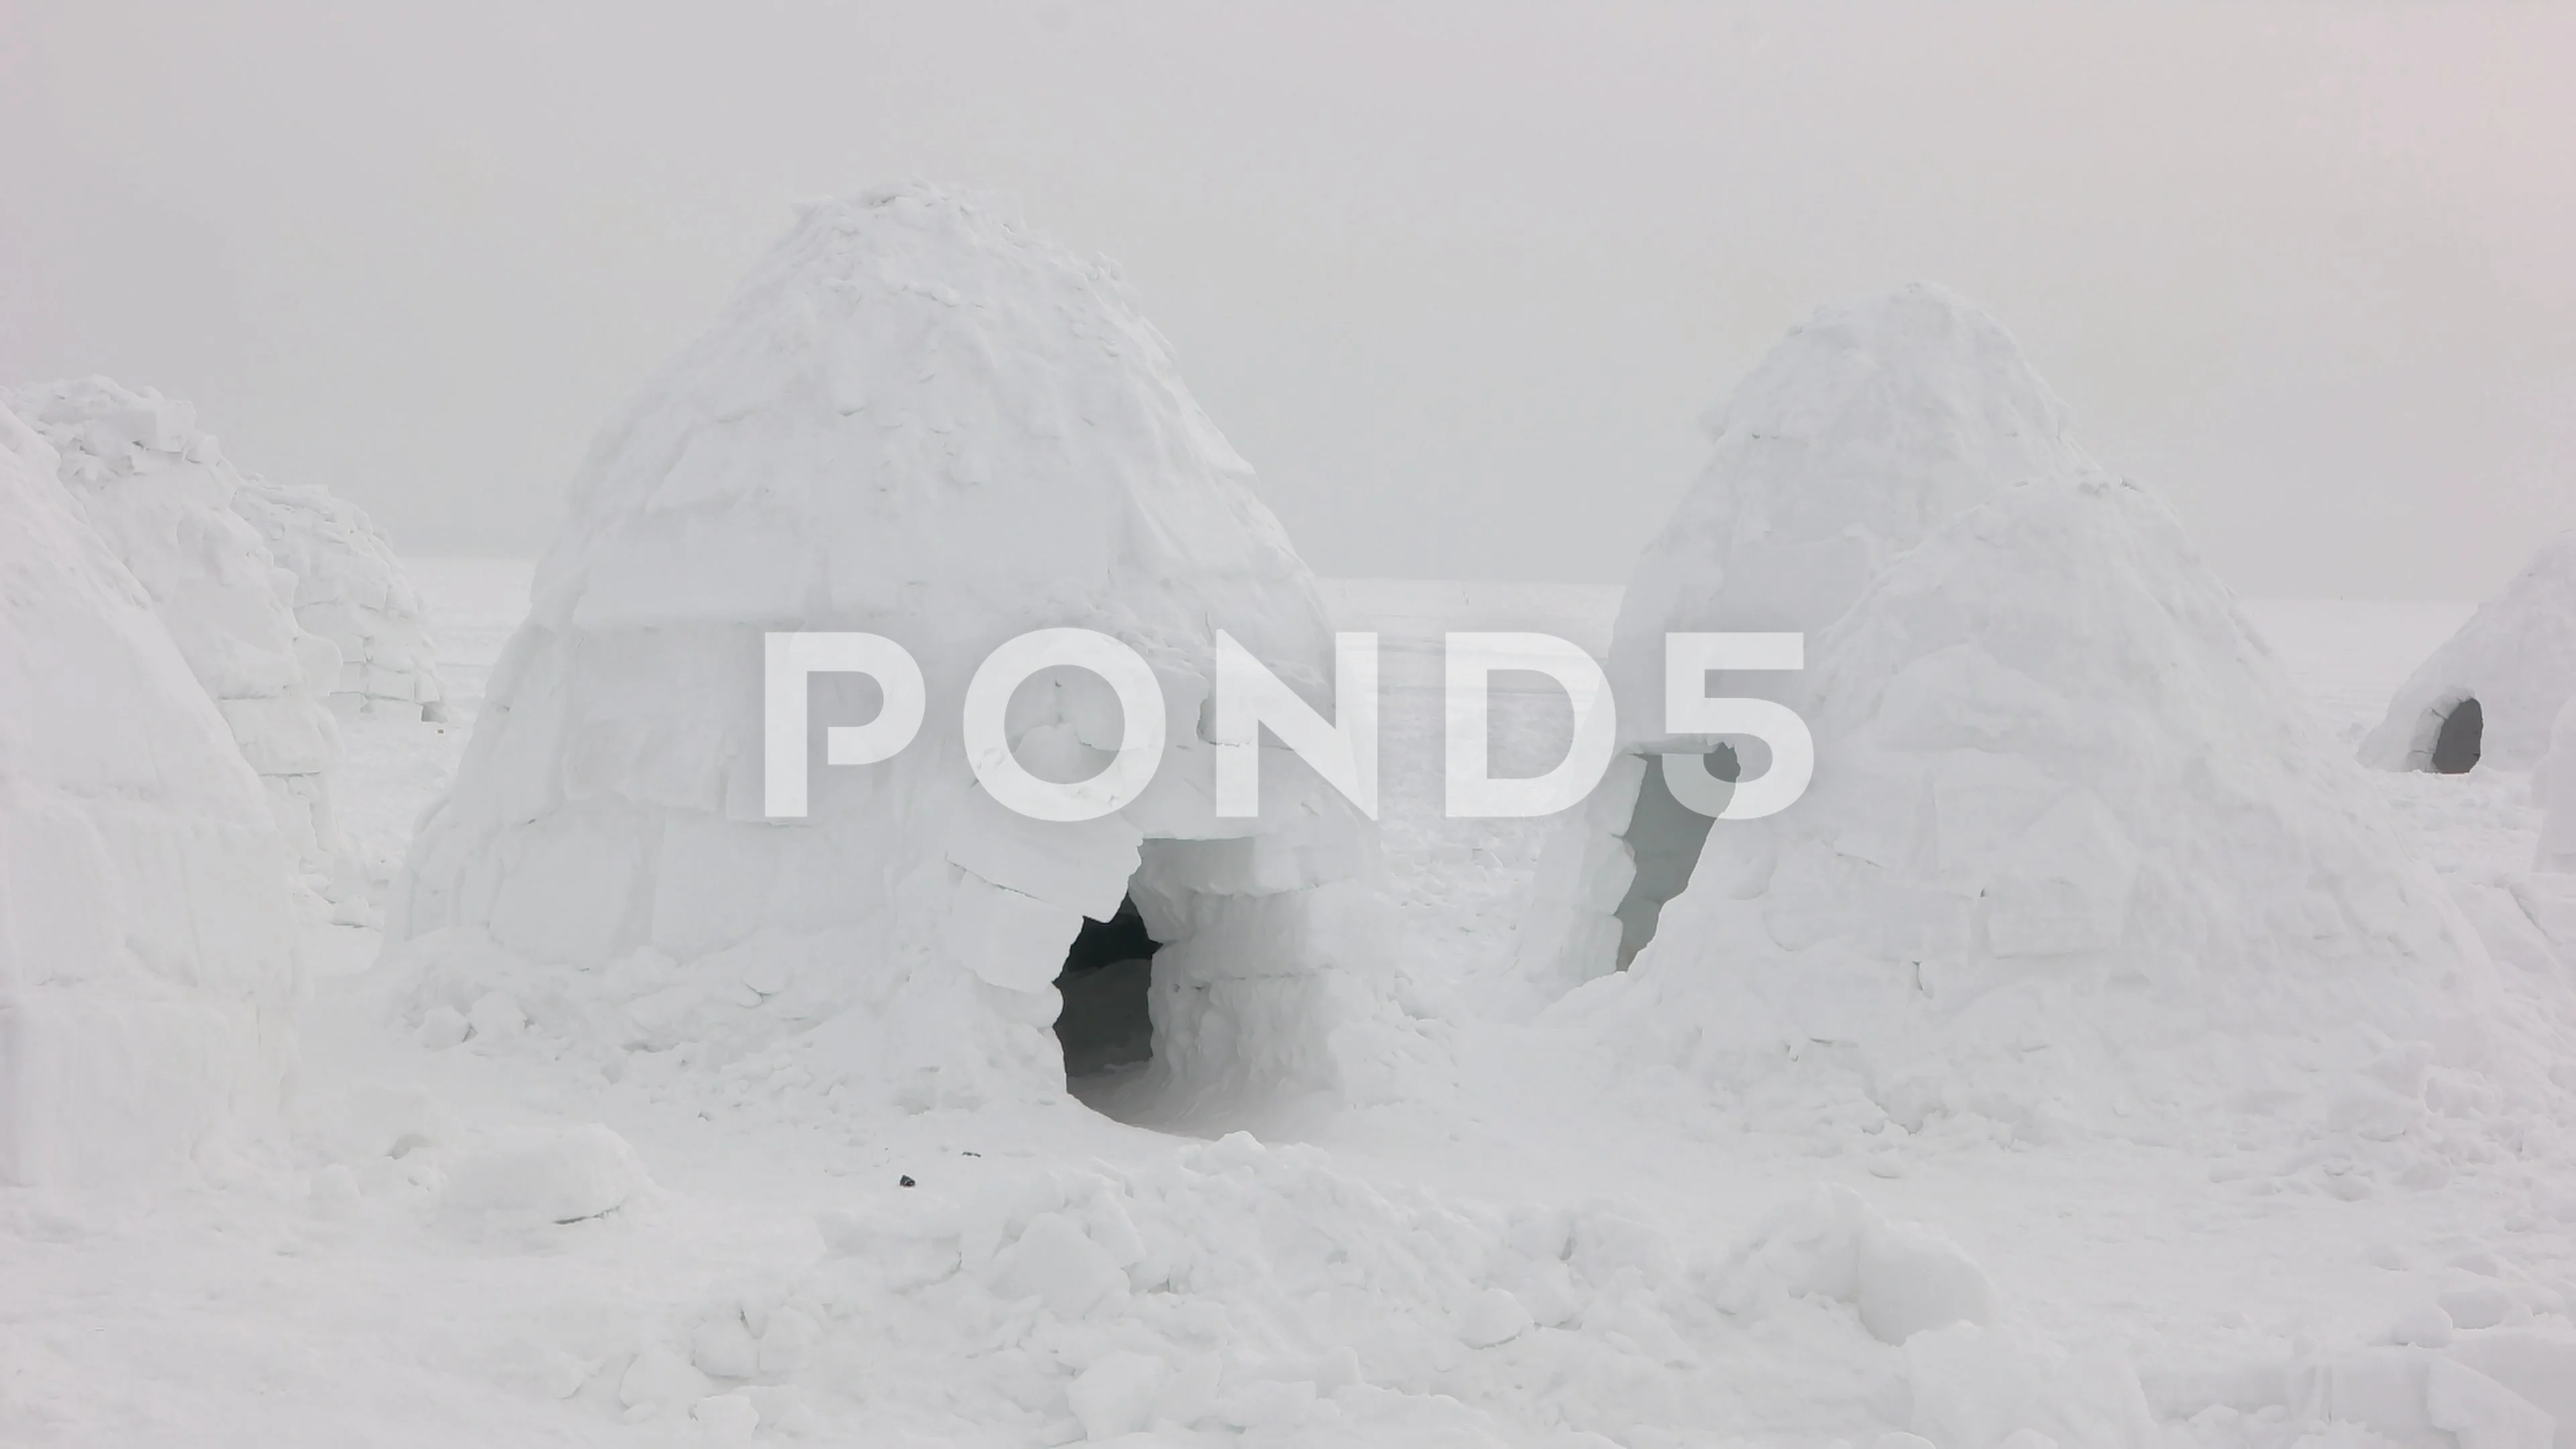 Igloo Building Time Lapse 